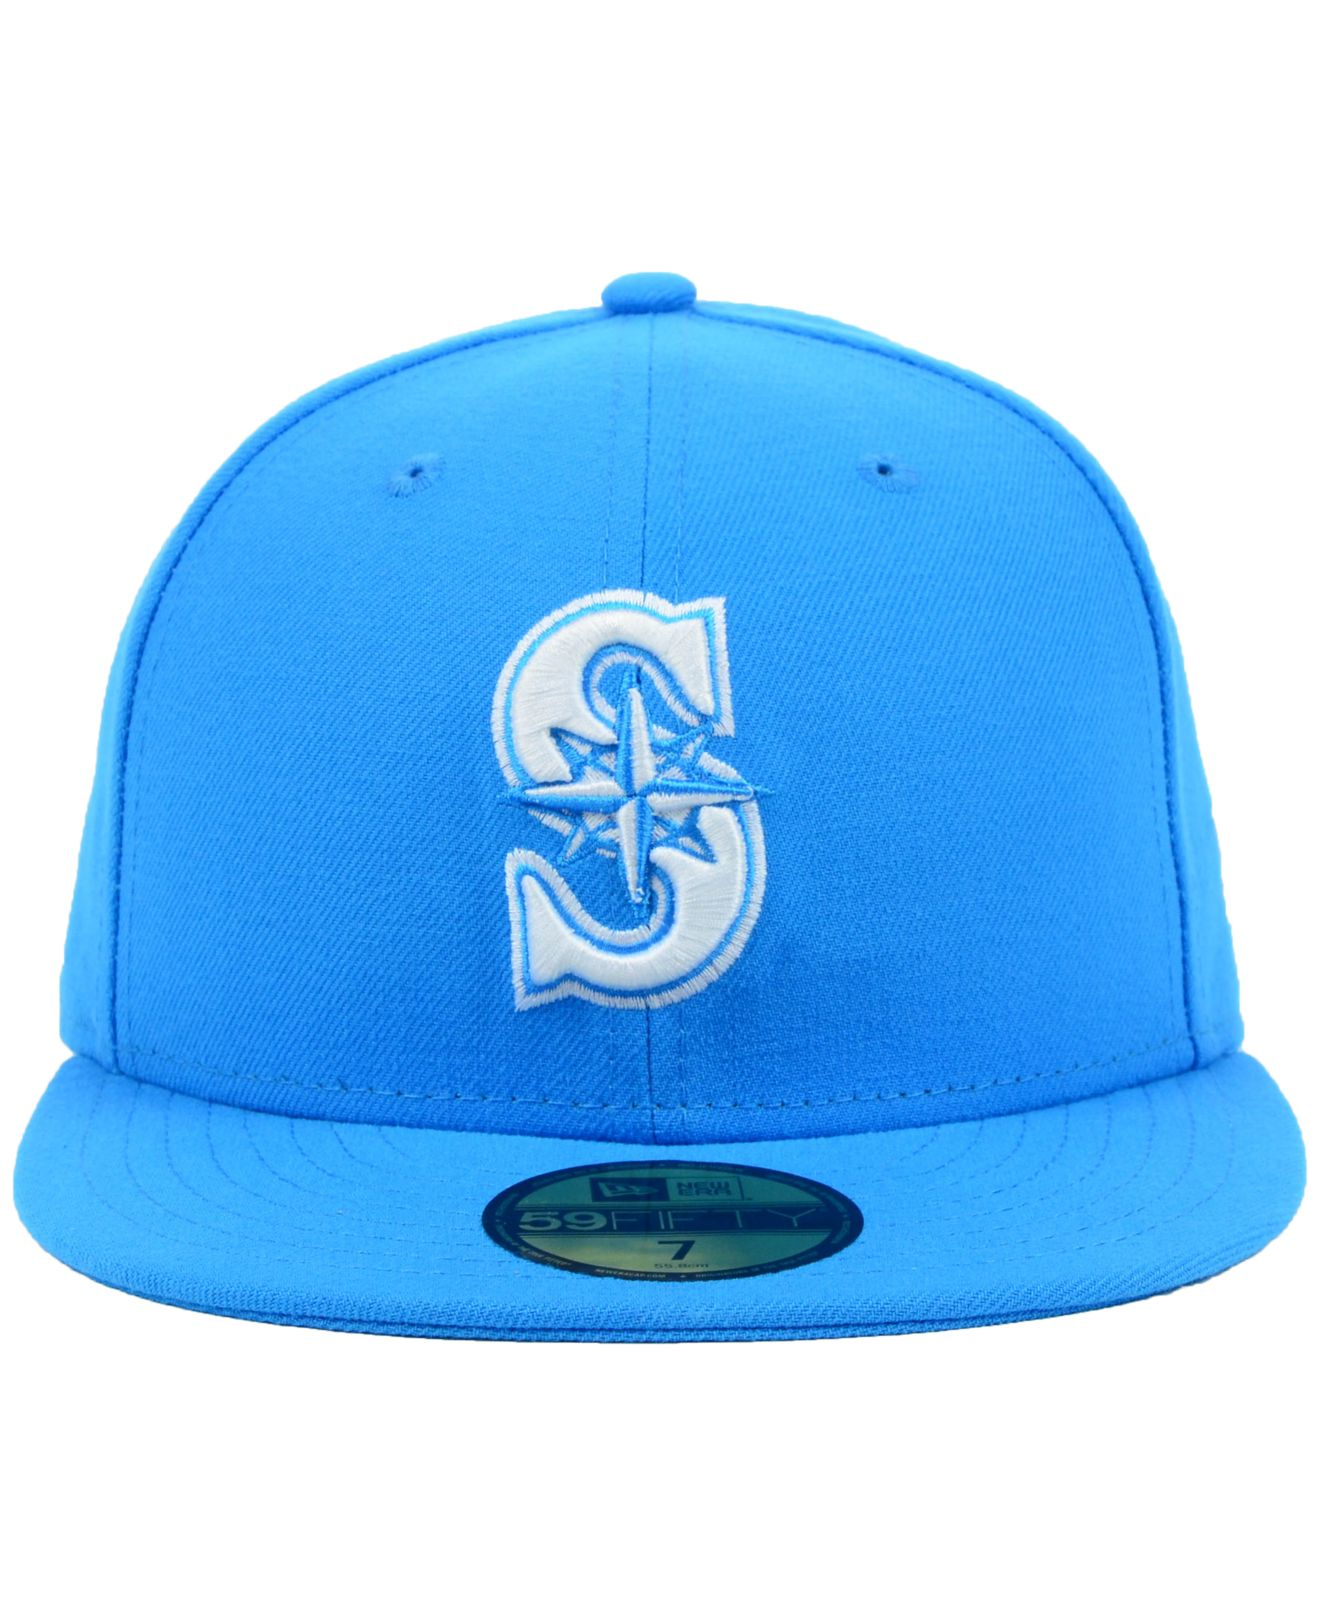 KTZ Seattle Mariners Mlb C-dub 59fifty Cap in Blue for Men